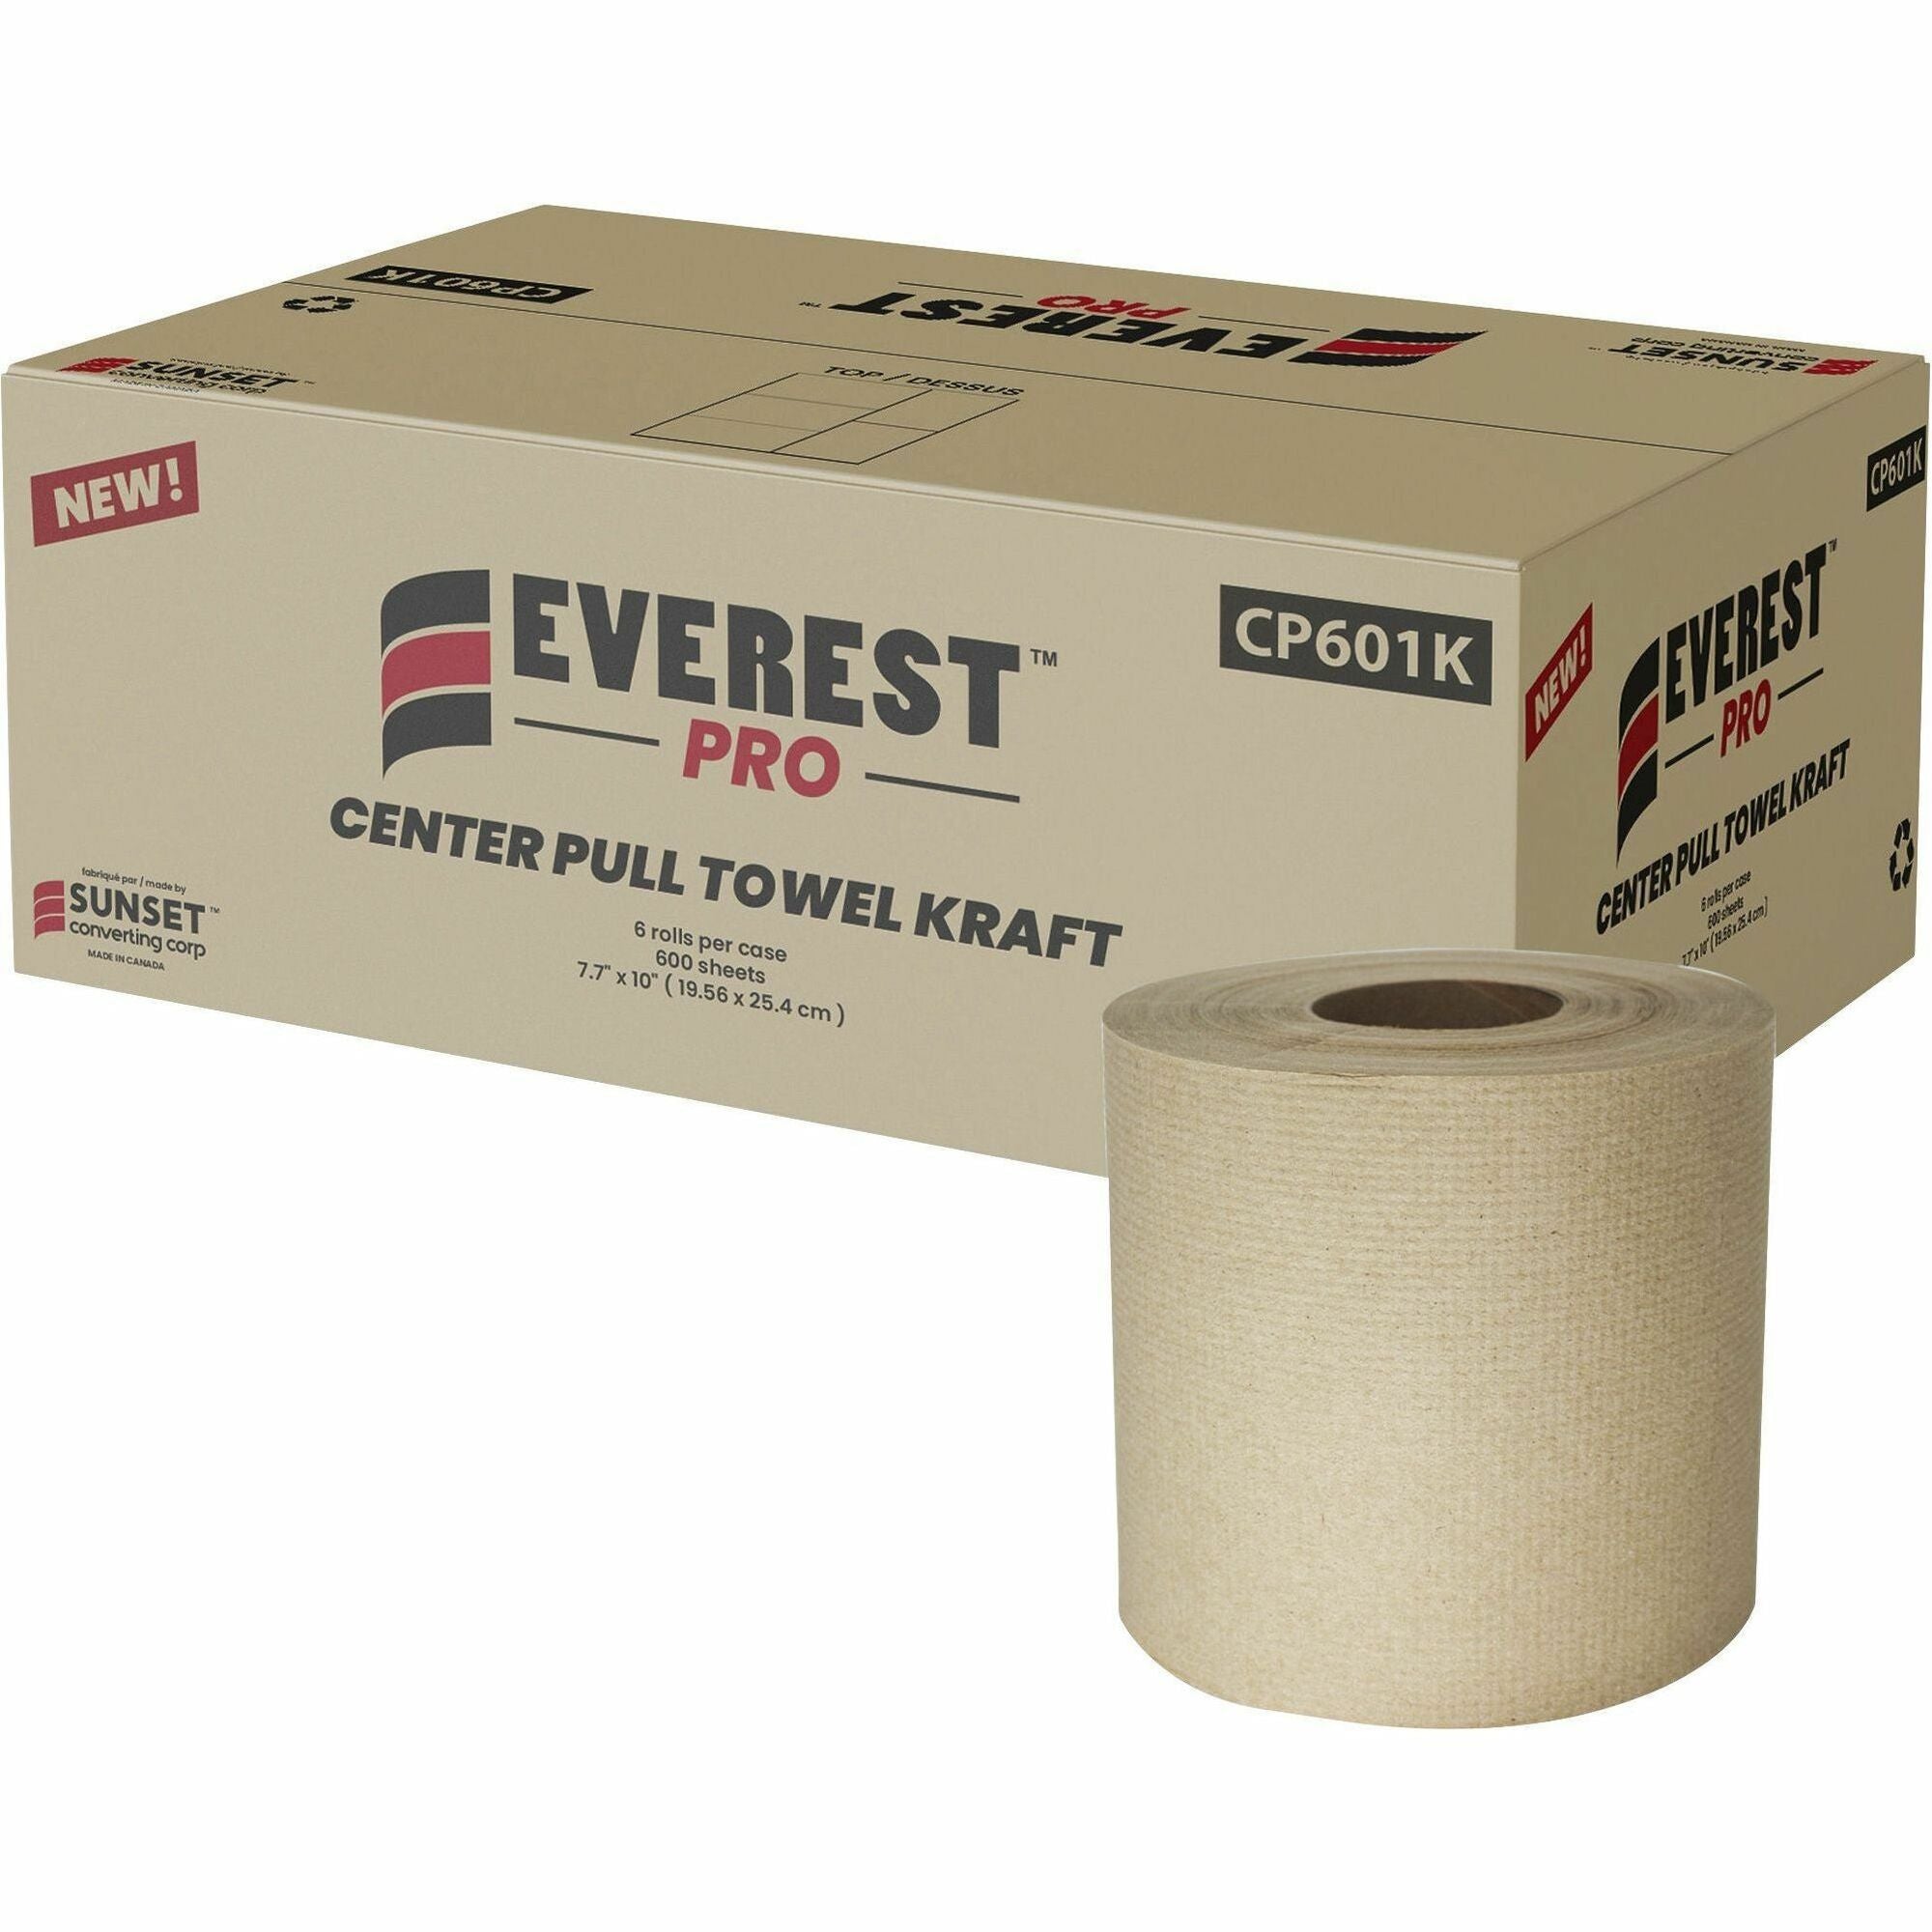 Everest Center-Pull Paper Towels - 2 Ply - 600 Sheets/Roll - Natural - Center Pull, Hygienic - For Hand, Restroom, High Traffic Area, Sanitary, Food Service